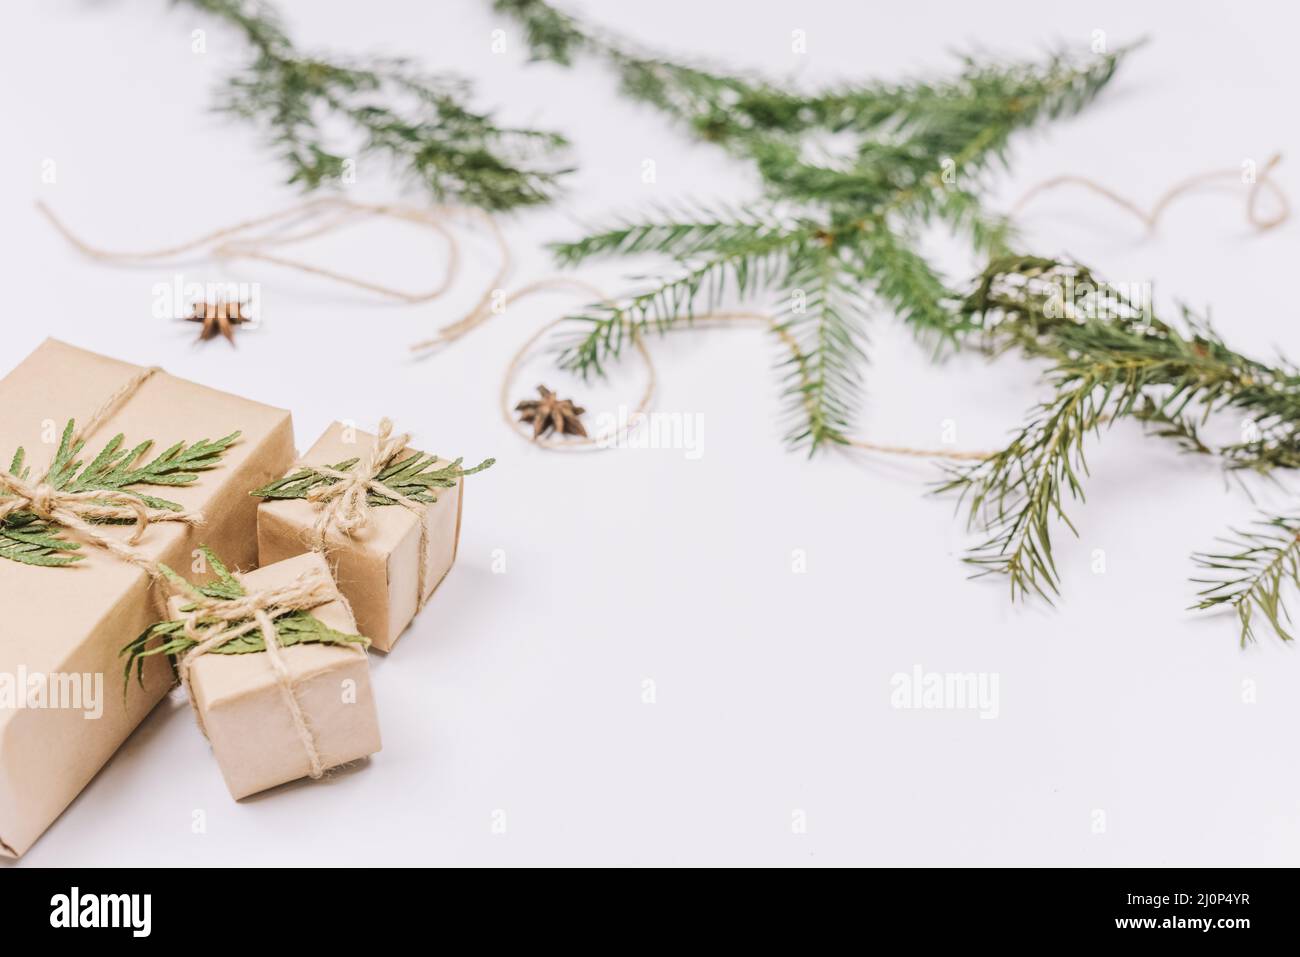 Wrapped christmas gifts near coniferous twigs. High quality and resolution beautiful photo concept Stock Photo